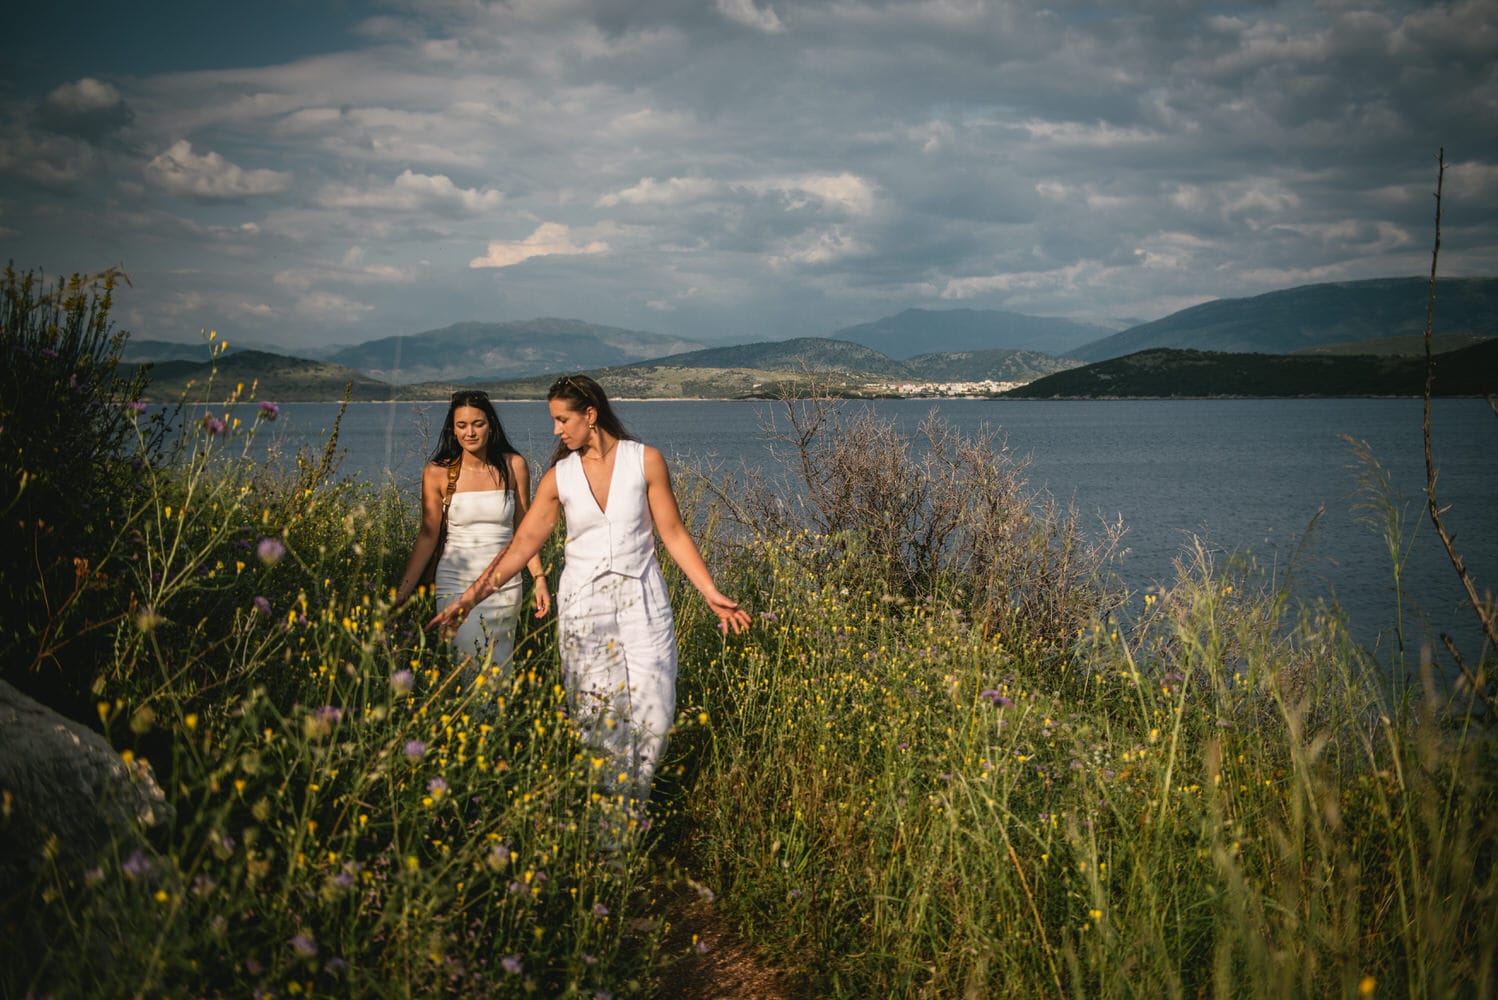 Hand in hand, brides walk along the Corfu coast, love echoing in the waves.